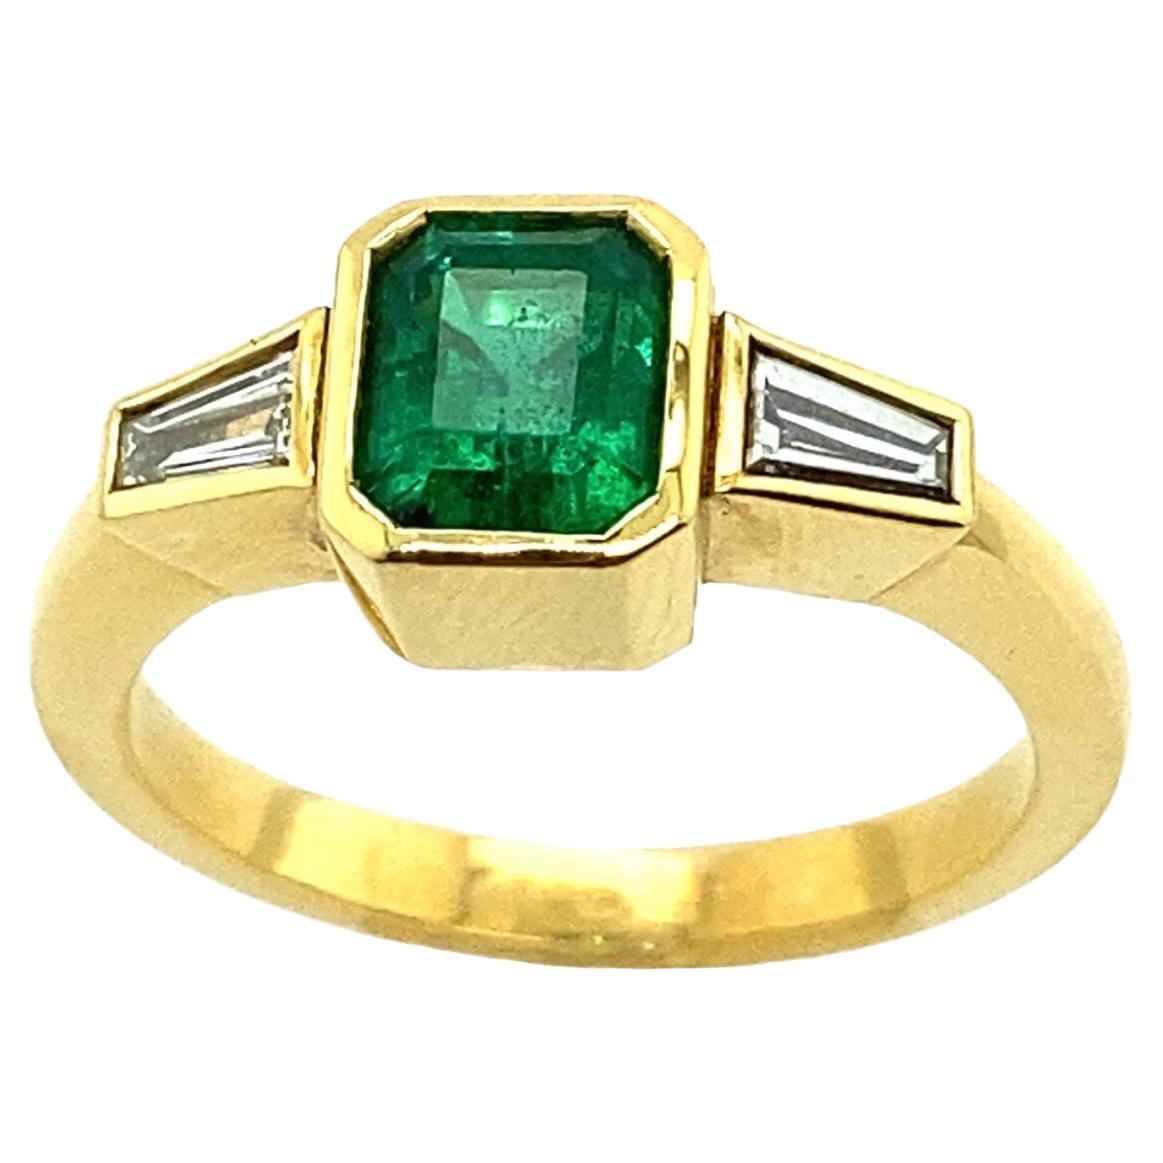 1.04ct Emerald Cut Emerald Ring Tapered Baguettes in 18ct Gold